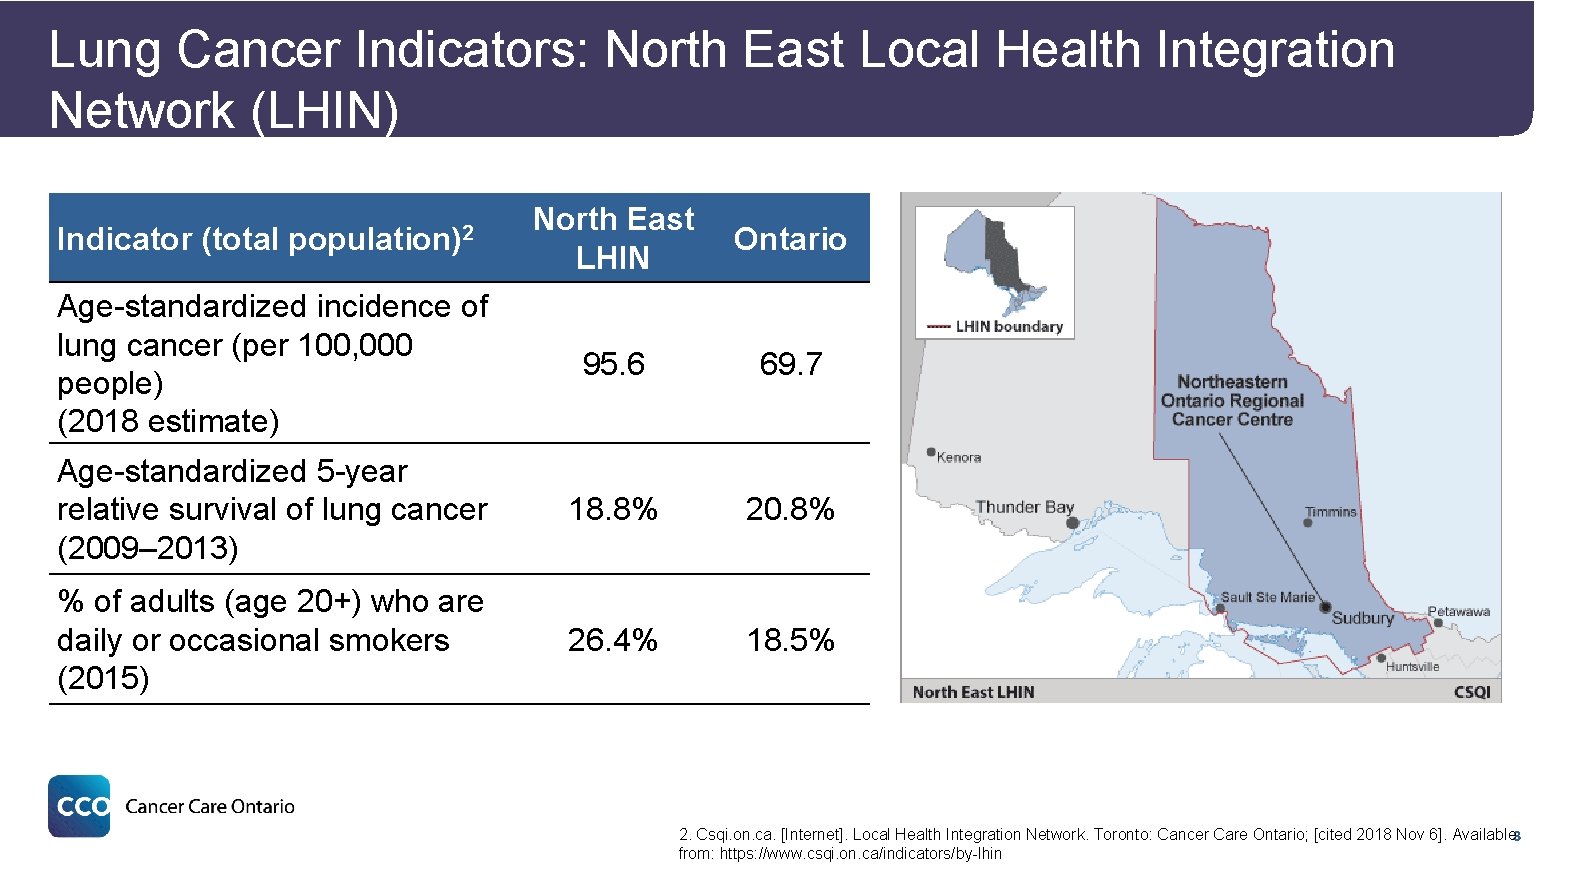 Lung Cancer Indicators: North East Local Health Integration Network (LHIN) North East LHIN Ontario